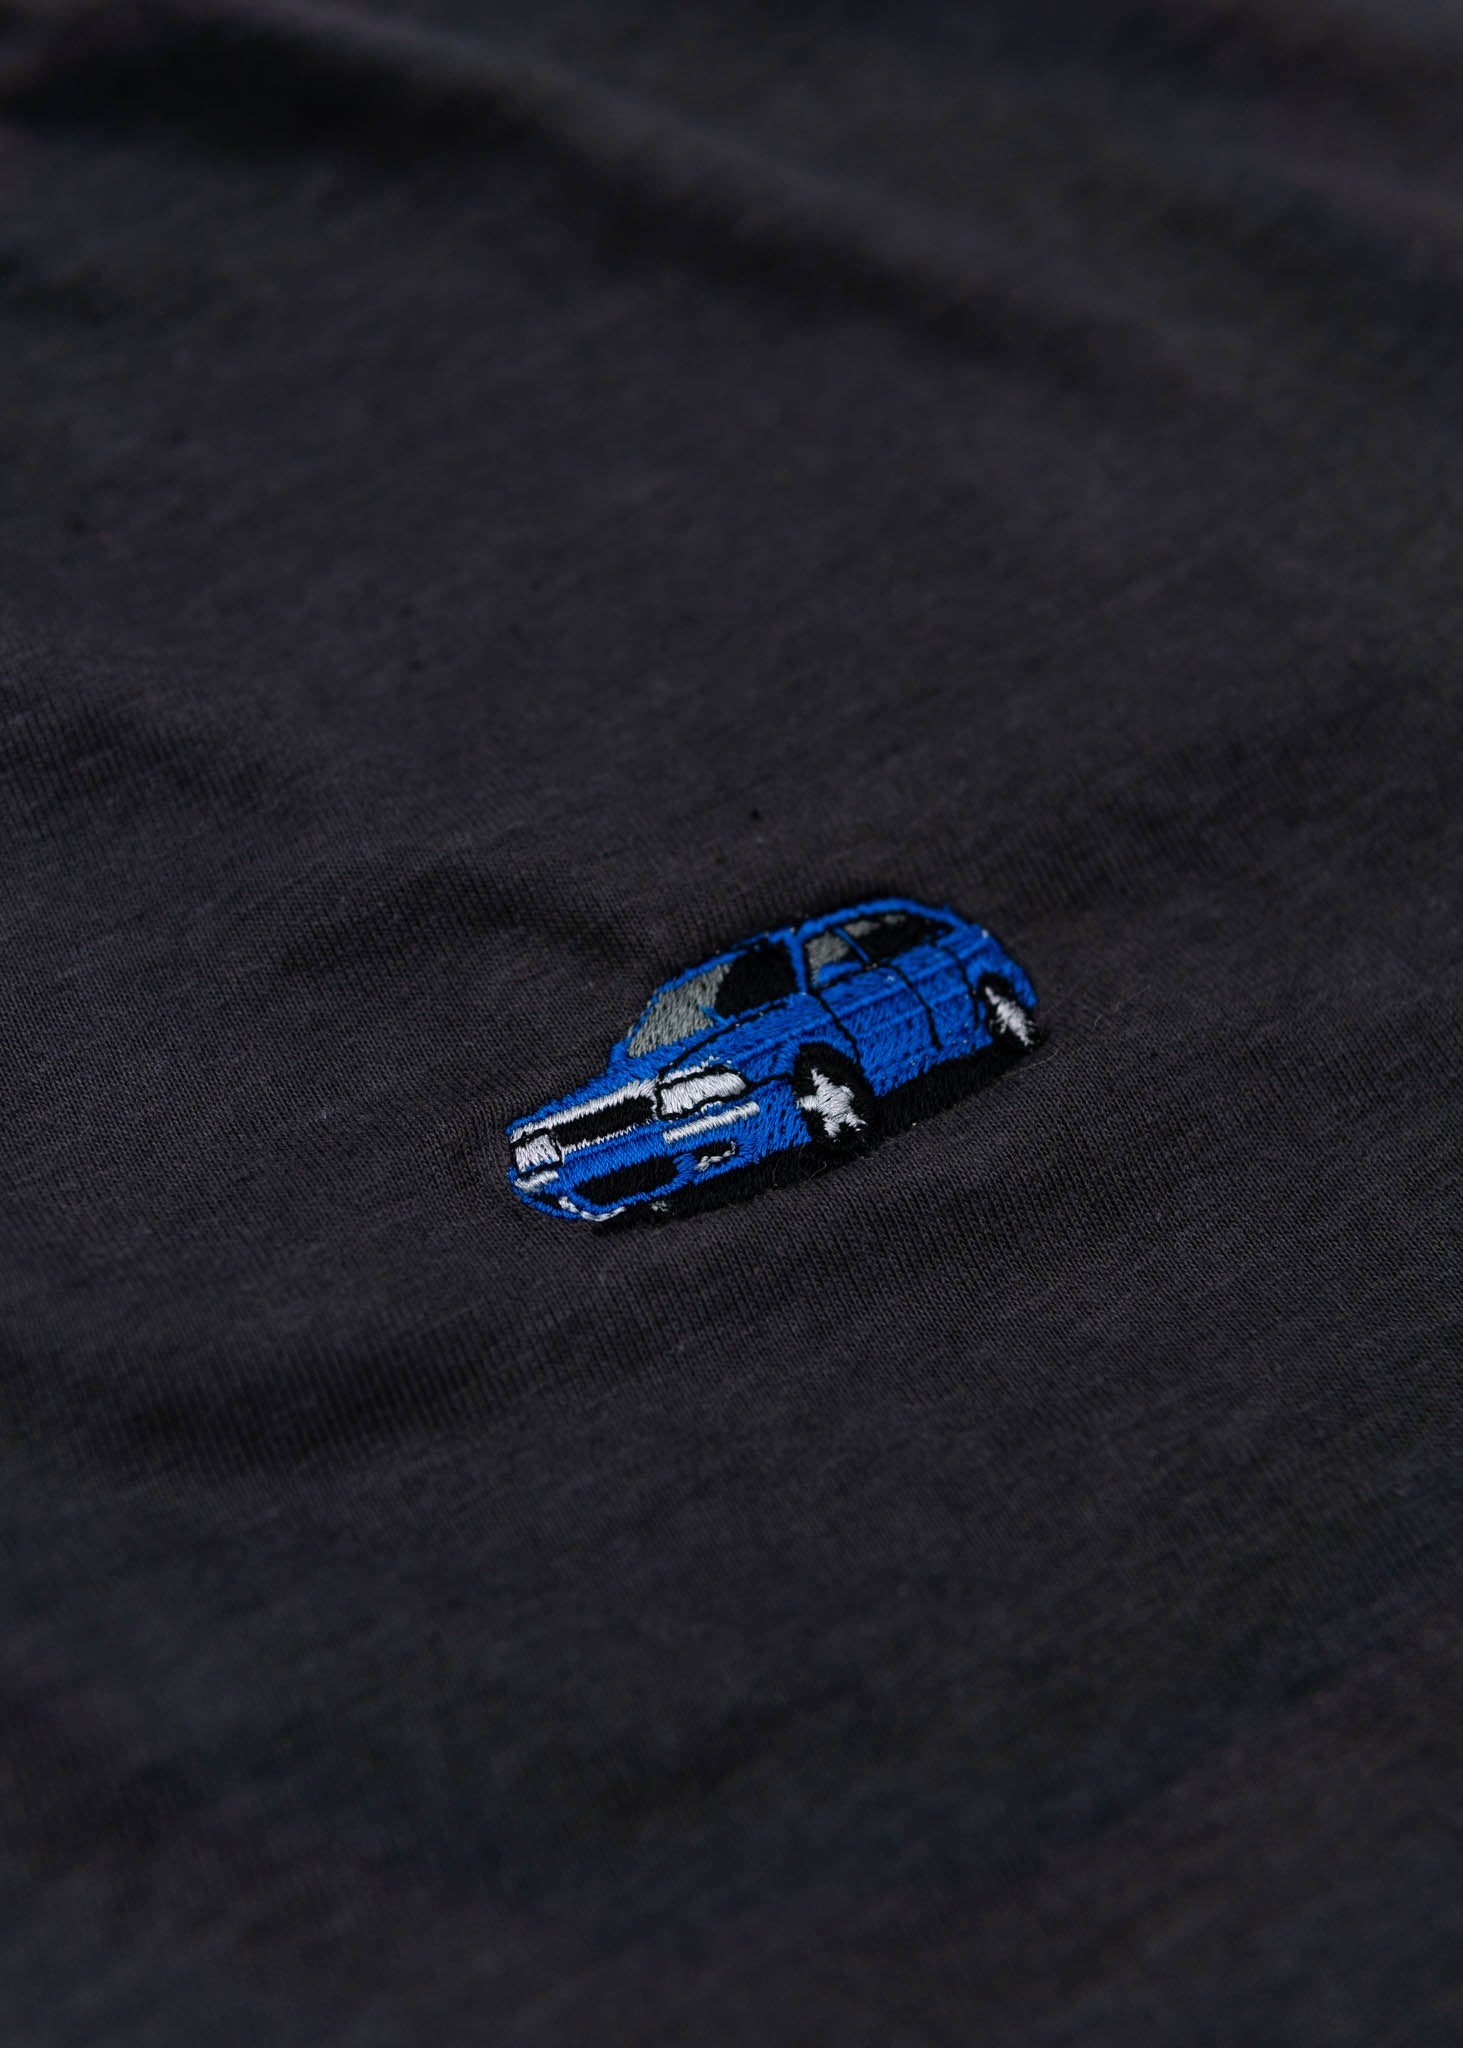 A dark grey cropped t-shirt for Audi women. Close up view of a 100% cotton crop tee with an embroidered Nogaro Blue Audi 80 RS2 Avant made by Porsche. The material is stretchy, and non-transparent with a crewneck neckline and short sleeves.